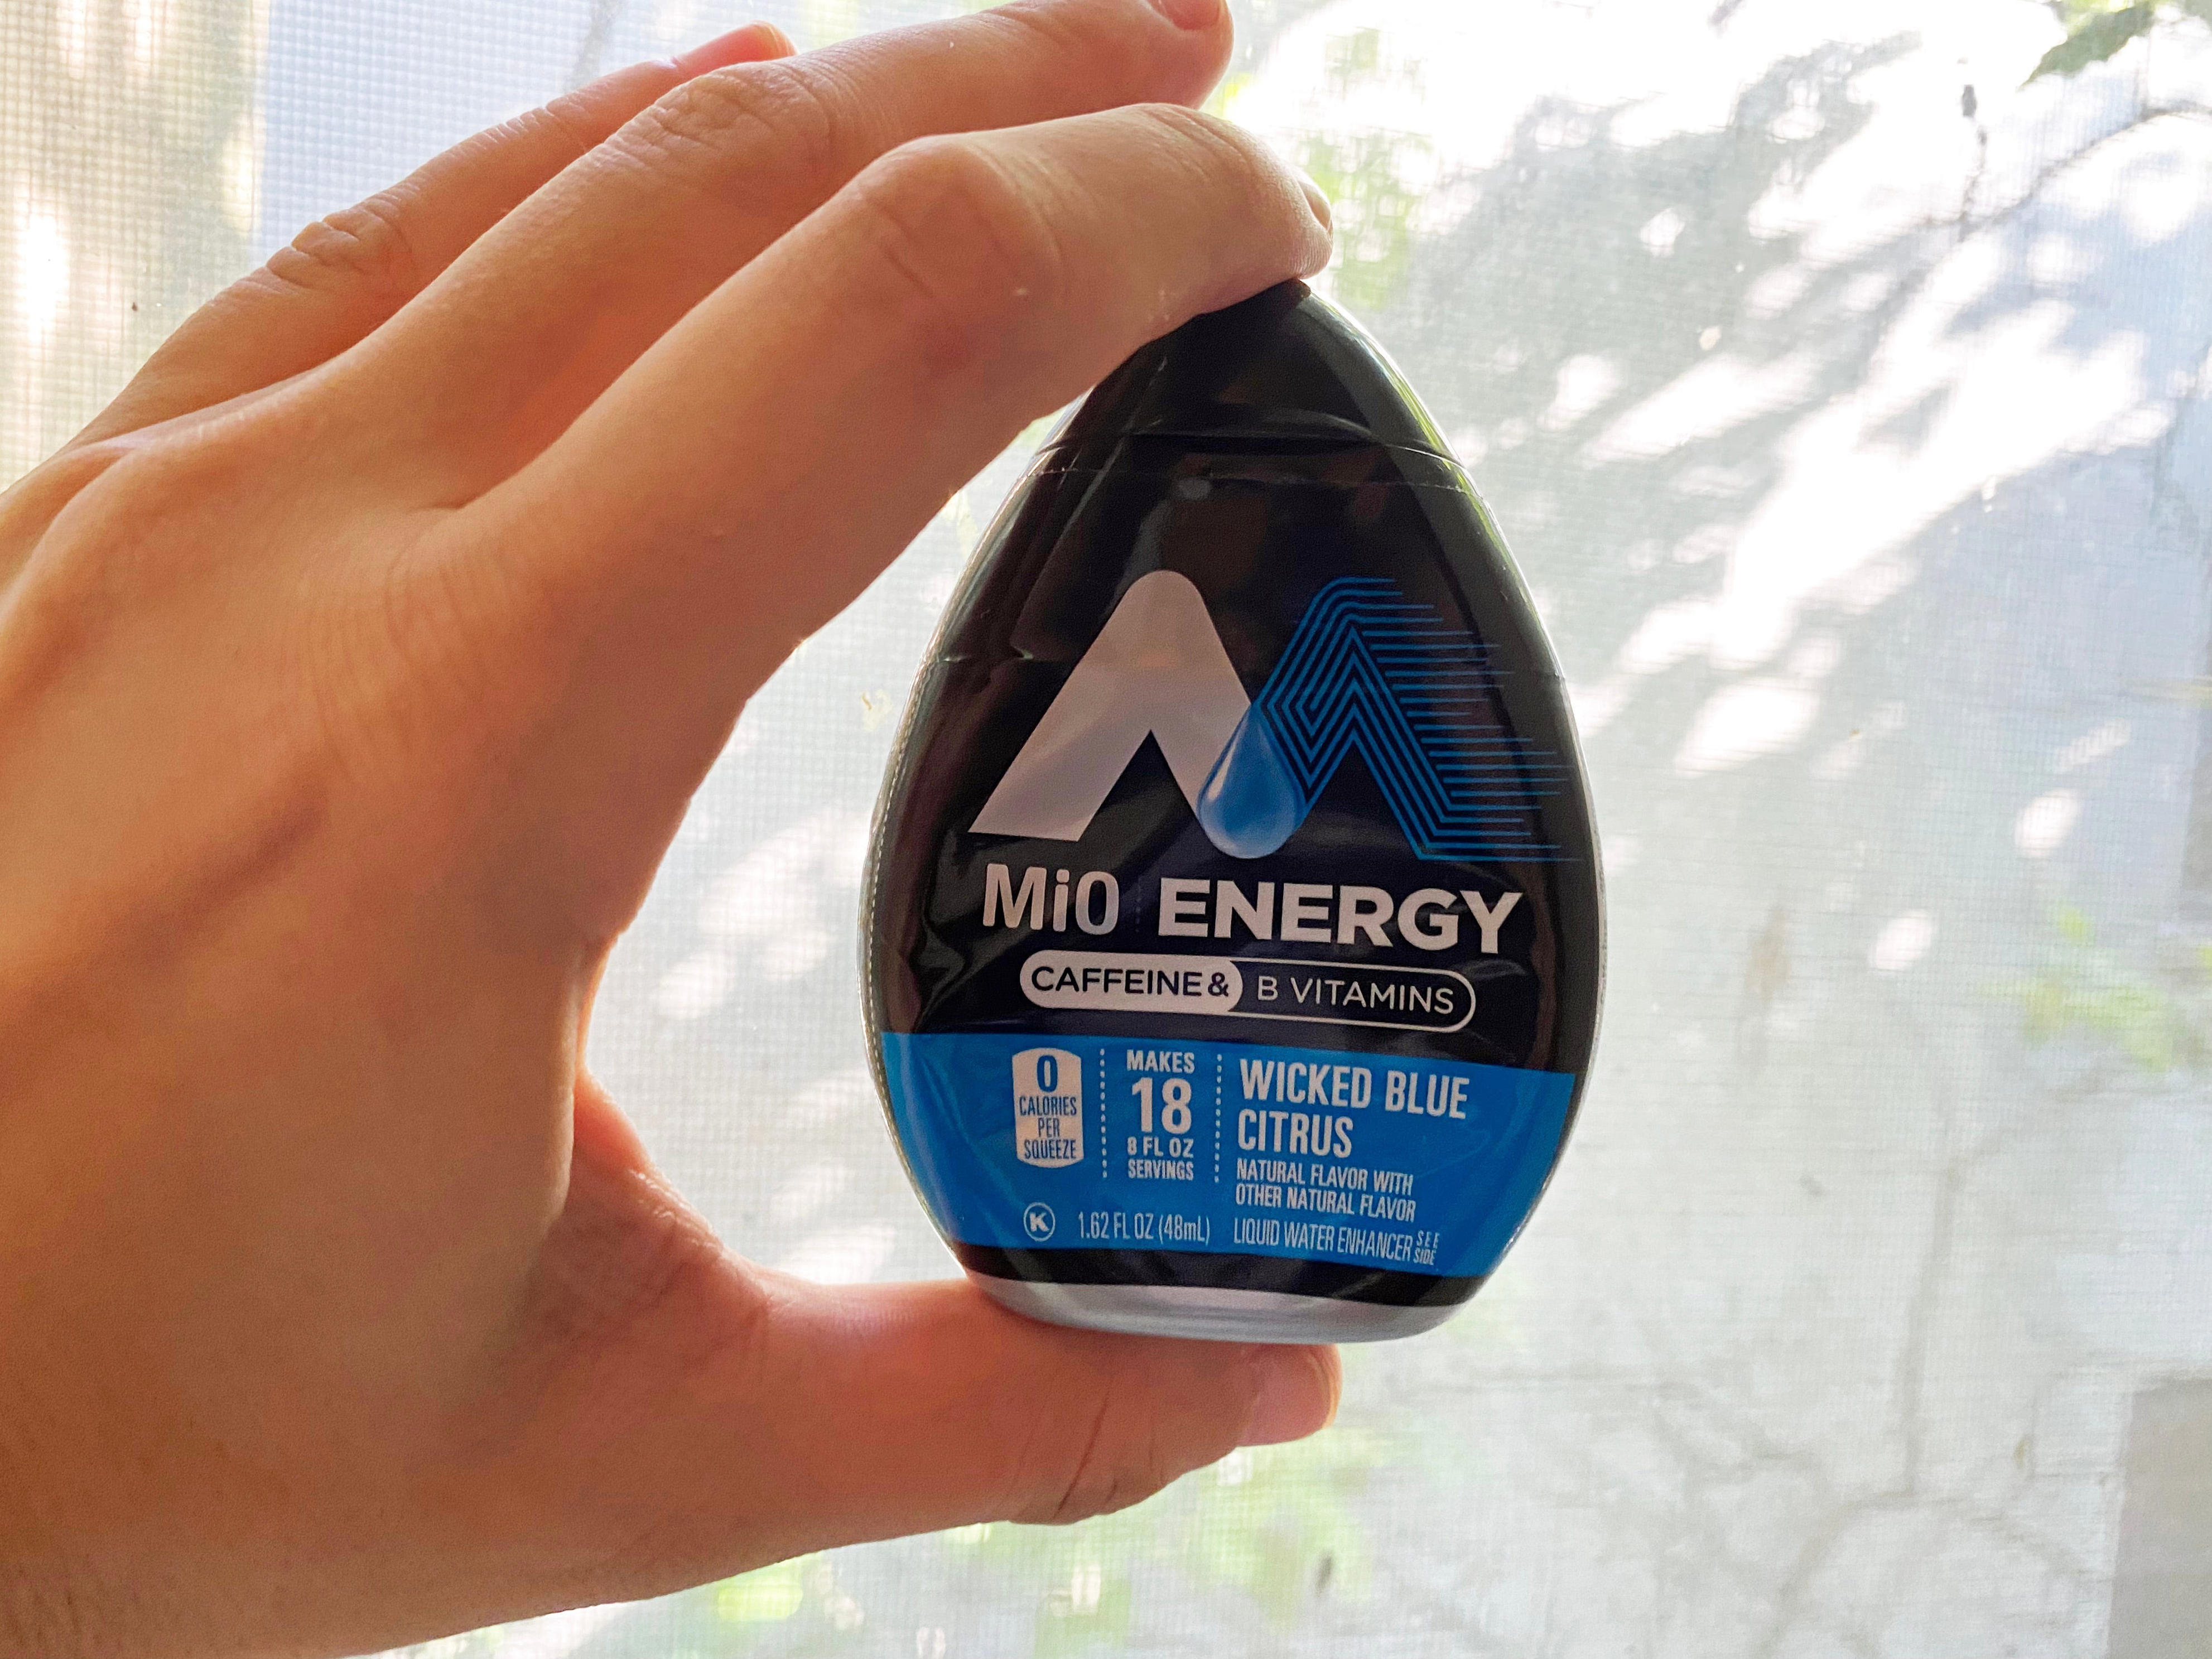 <p>In the summertime, I drink Mio every morning, a caffeinated fruit-flavored addition to water with B vitamins. I can't stand to drink a hot coffee in the heat, and I find it gives me the extra jolt of energy I need.</p><p>Since I visited Canada in the summer, I brought my Mio and it helped me to feel comfortable and alert while on the go.</p>